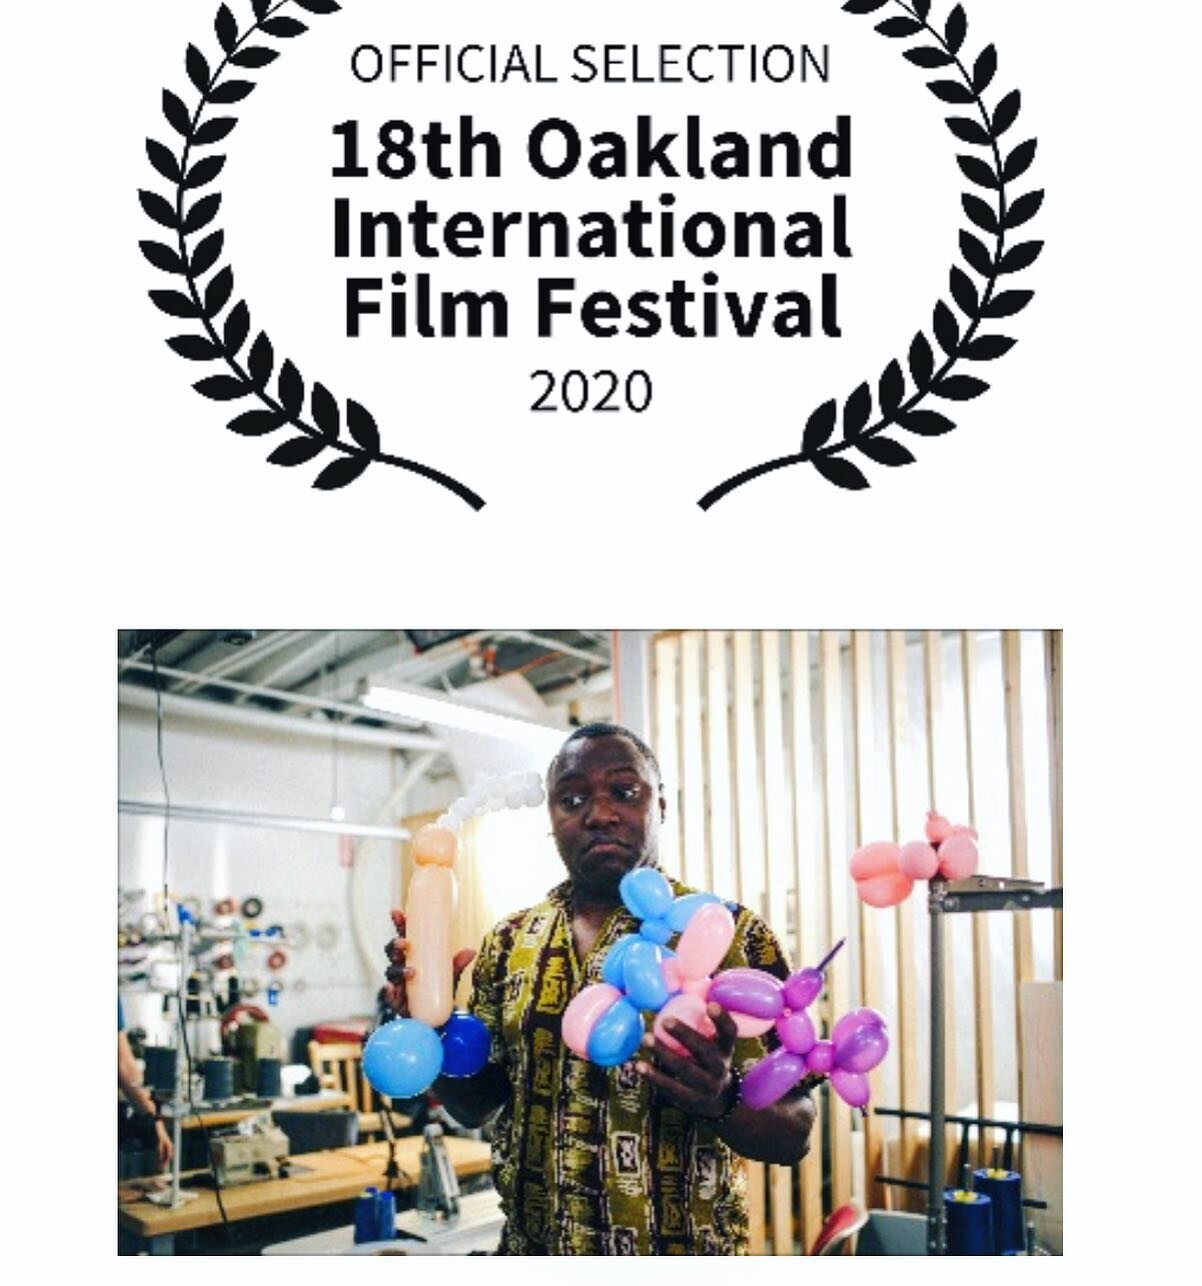 **corrected ticket link** sorry

$8 now STREAMING Oakland International Film Festival 
7 day rental
Sep 17 - 27th
TIX: https://theoaklandinternationalfilmfestival.vhx.tv/checkout/fall-back-down-1/purchase?purchase=1

This year&rsquo;s festival theme 